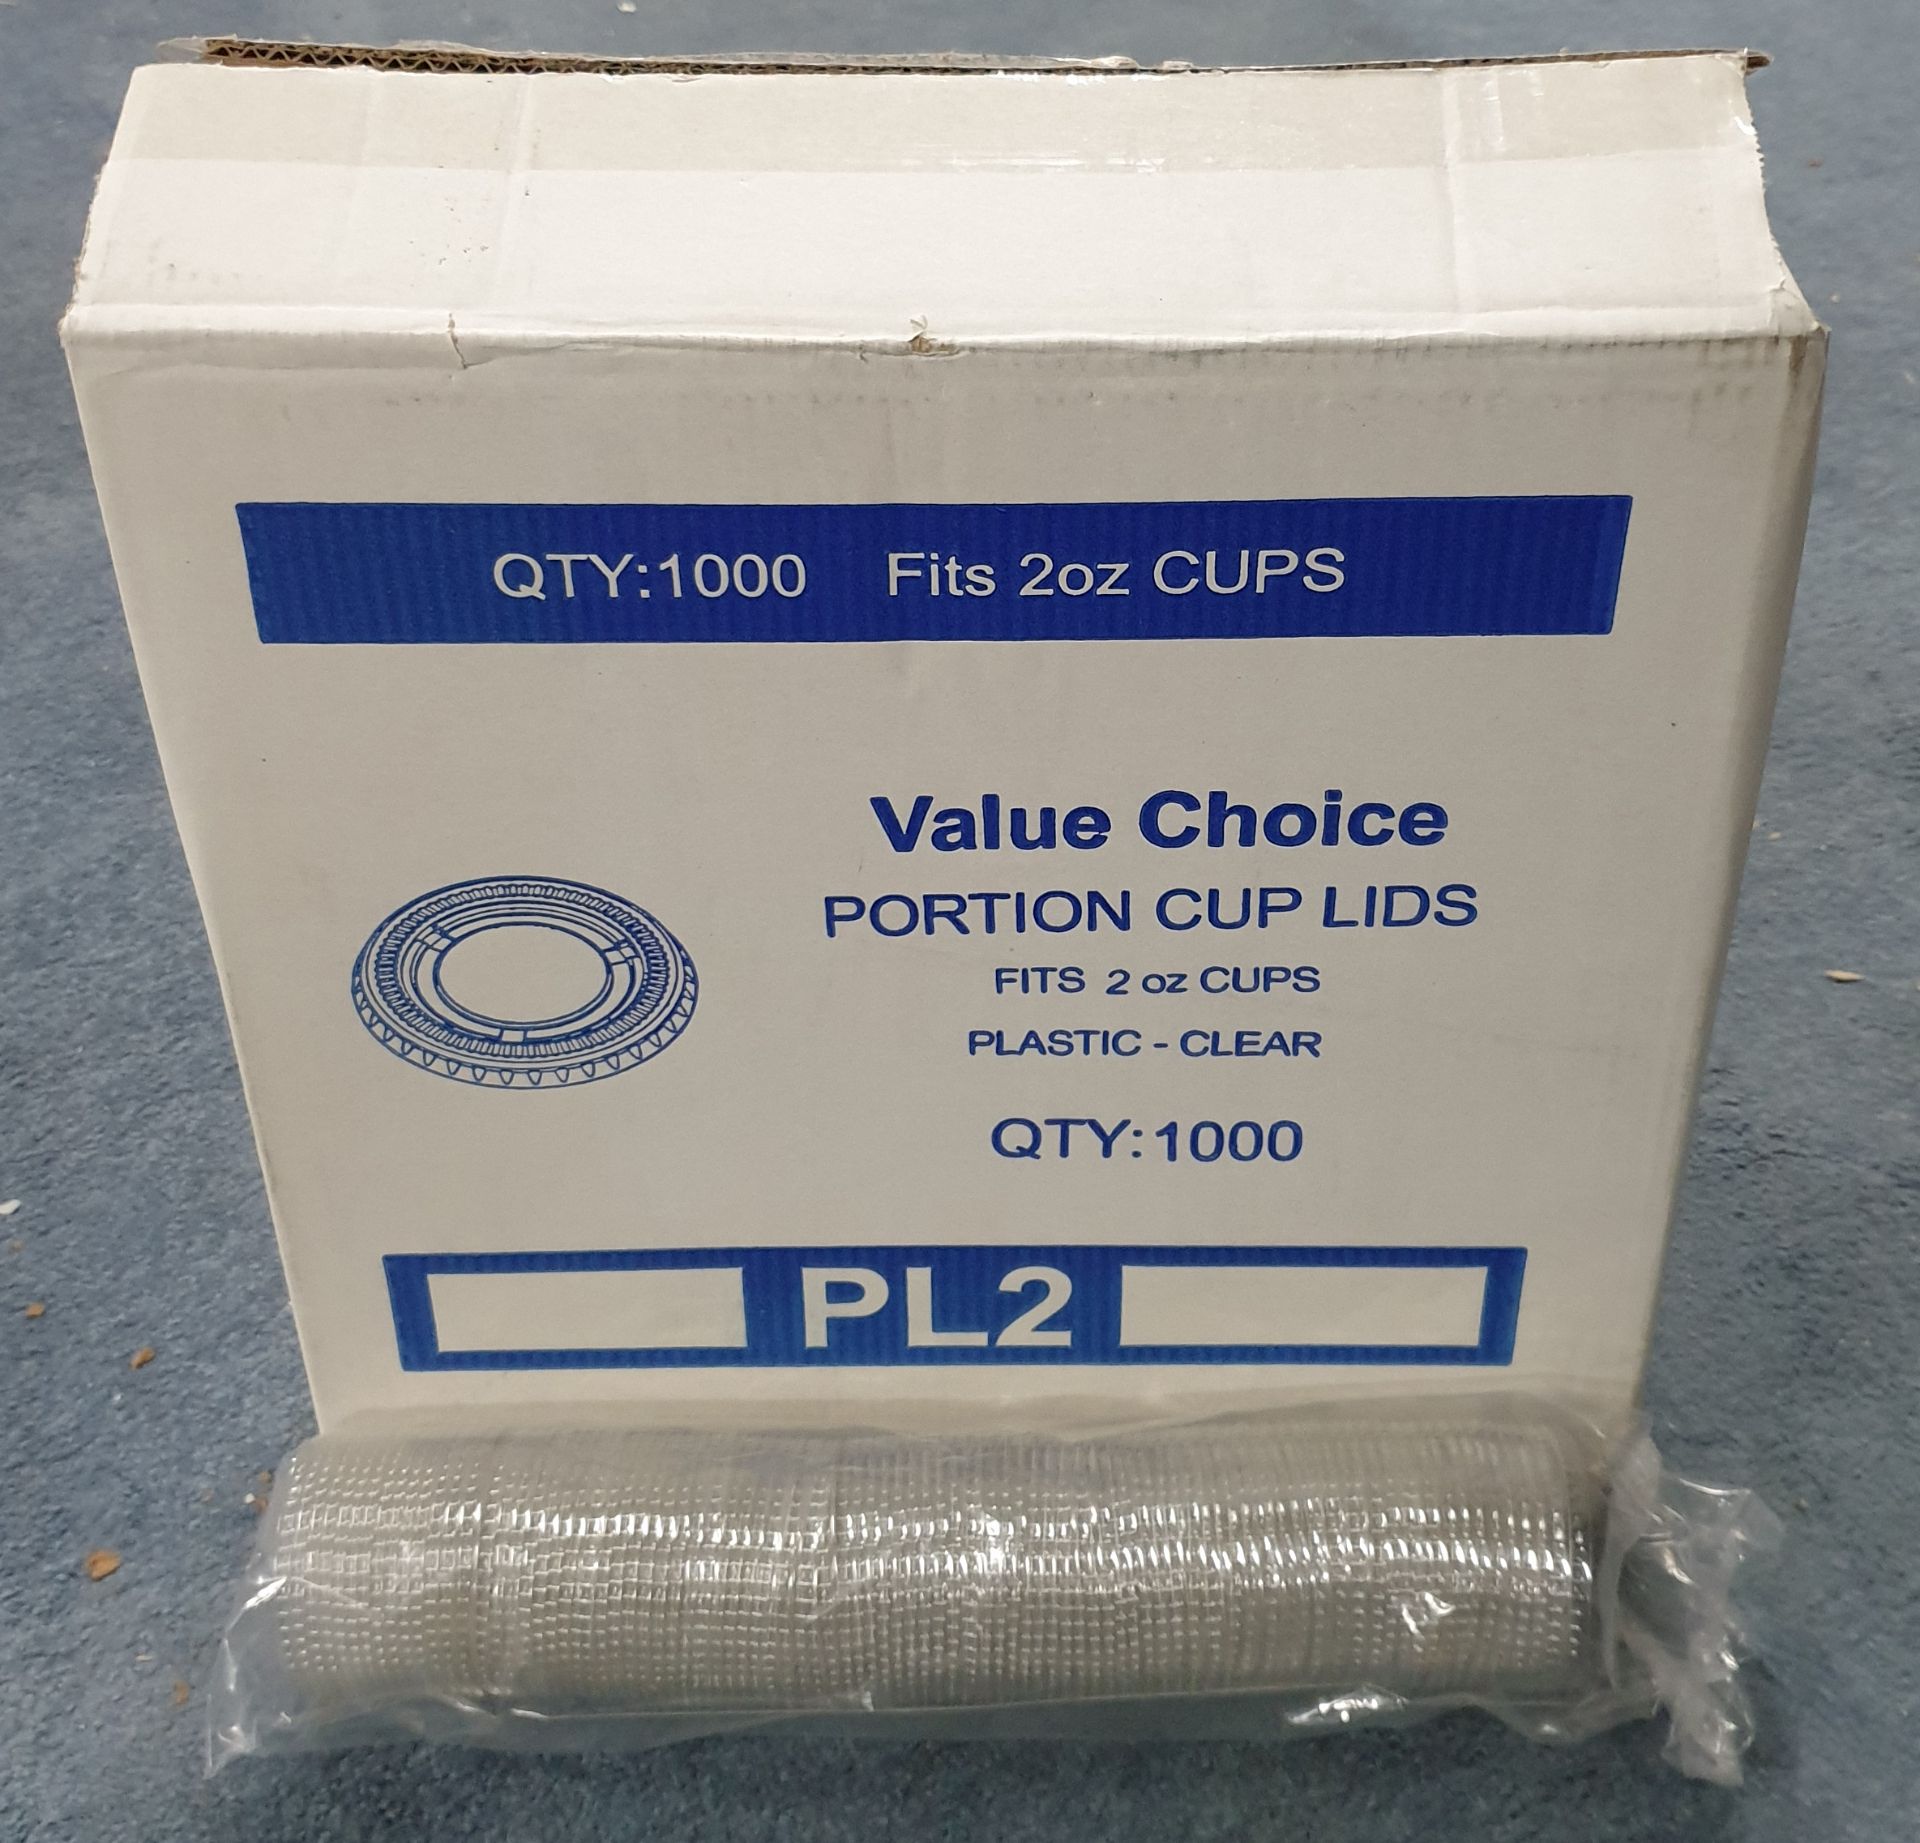 1 x Box of Portion Cup Lids by Value Choice